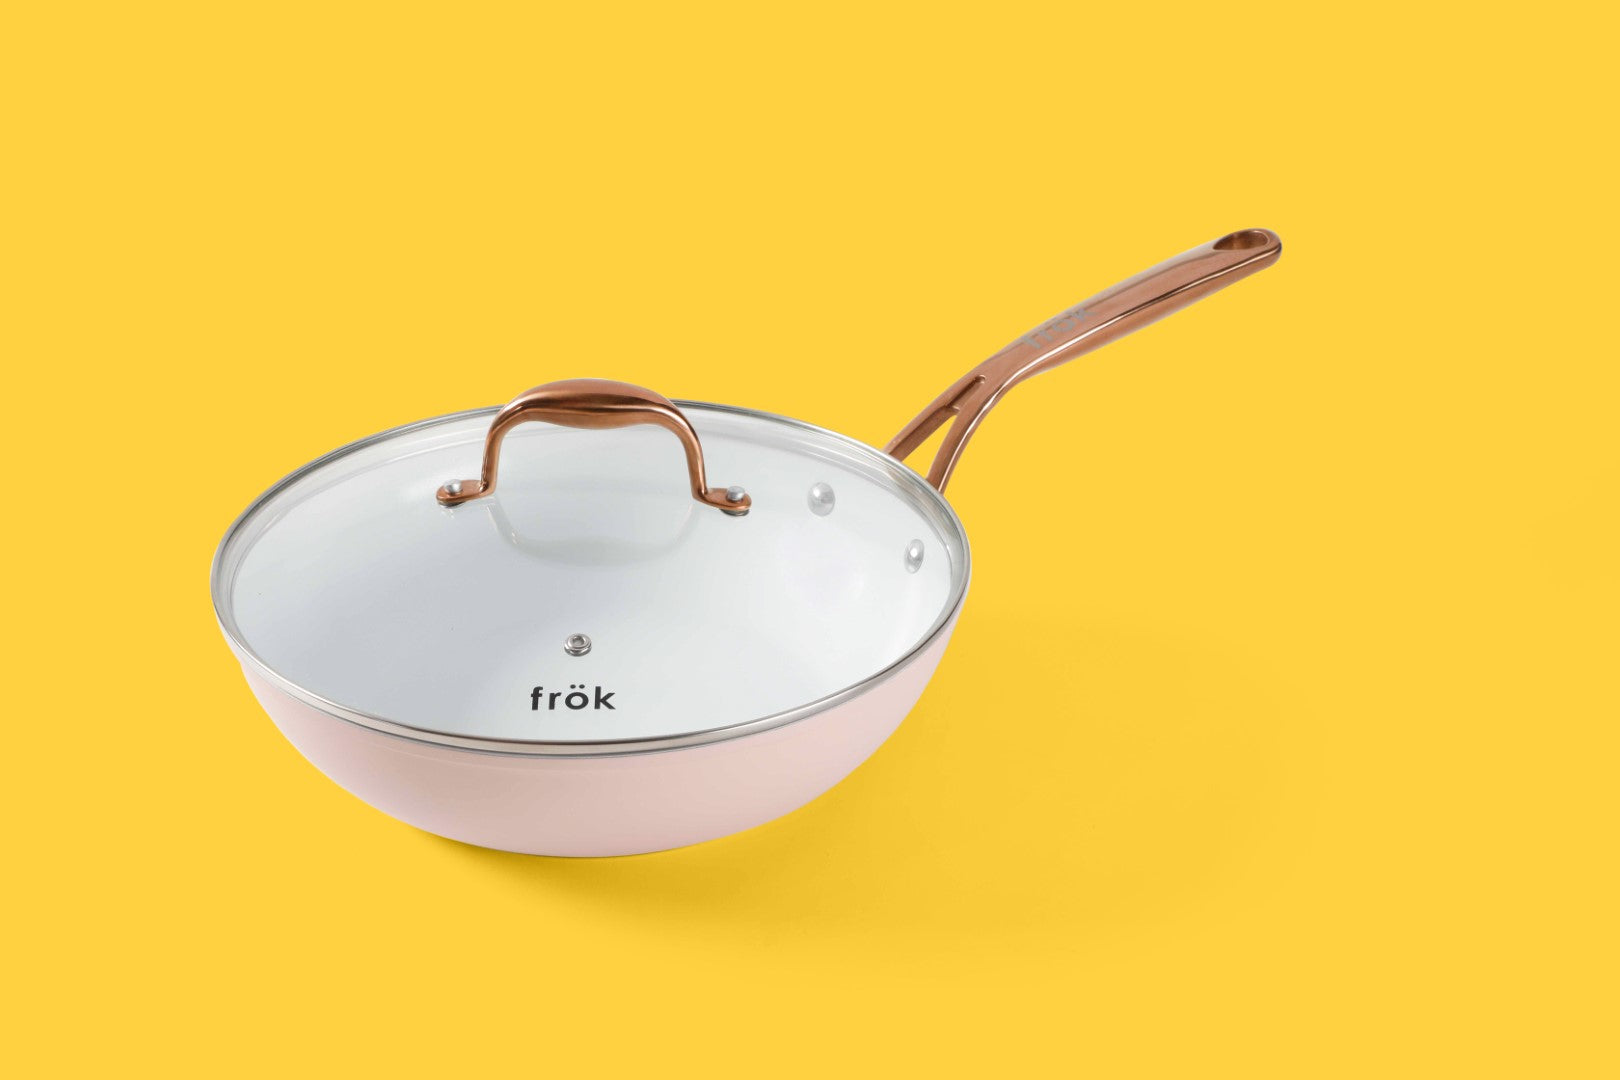 Frok 11" All-In-One Ceramic Non-Stick Fry Pan Meets Wok w/ Lid